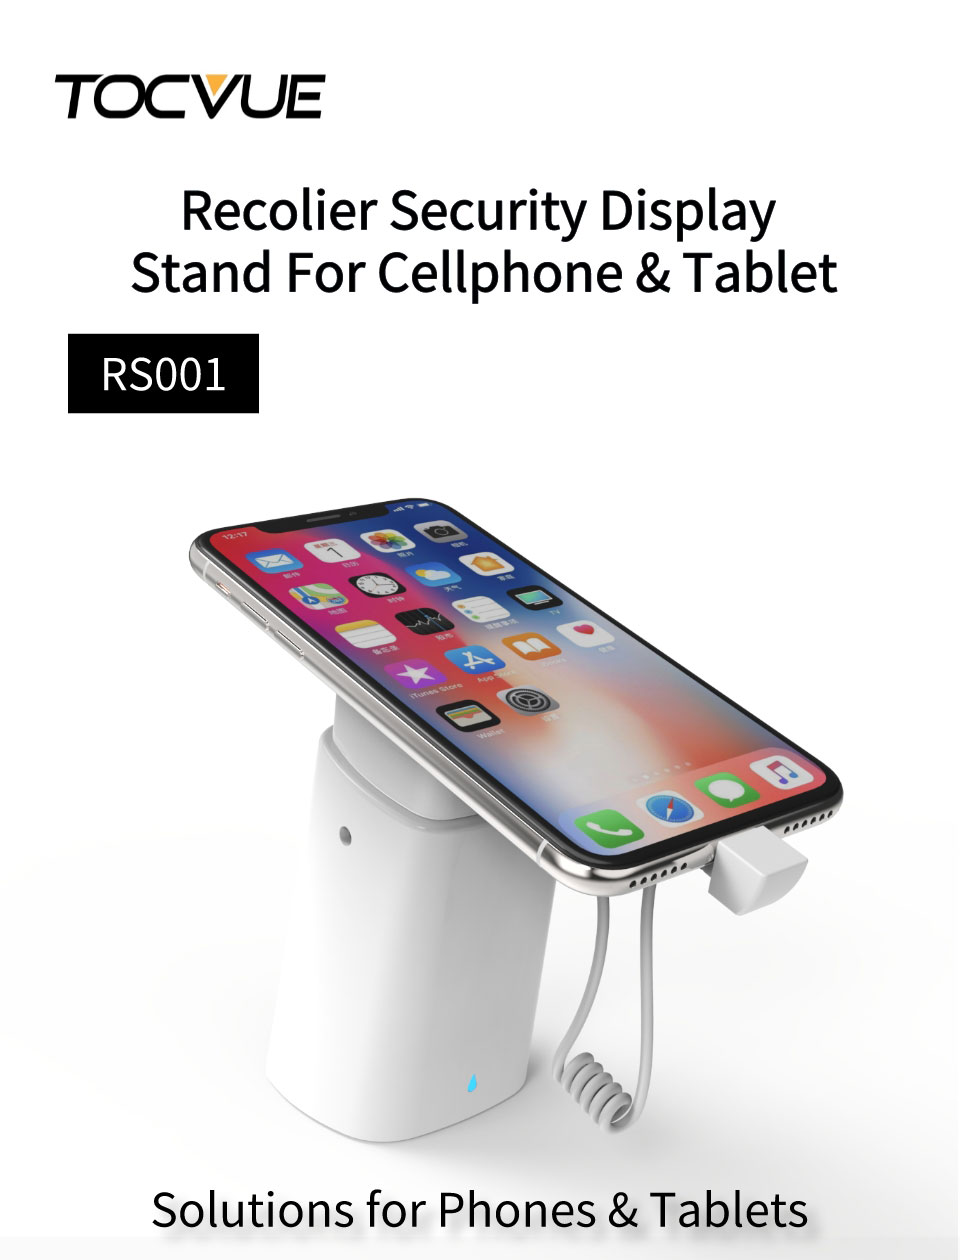 RS001 01 RS001-1 High Security Recolier Phone Security Display Stand